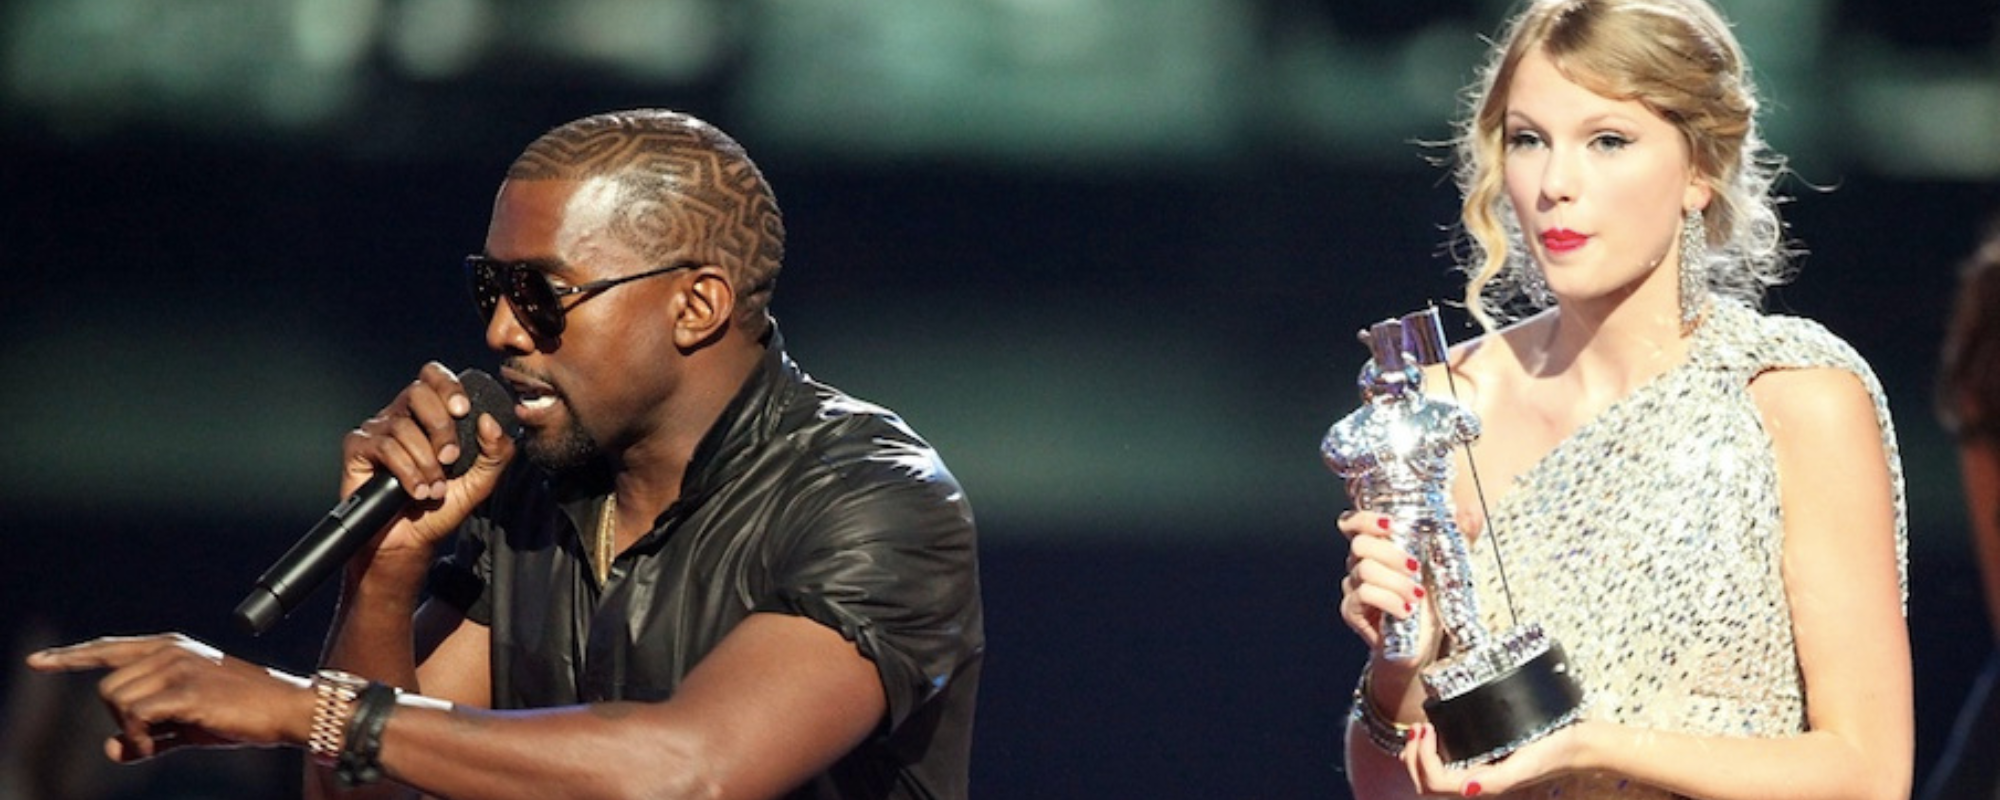 Kanye West’s Top 5 Controversial Moments